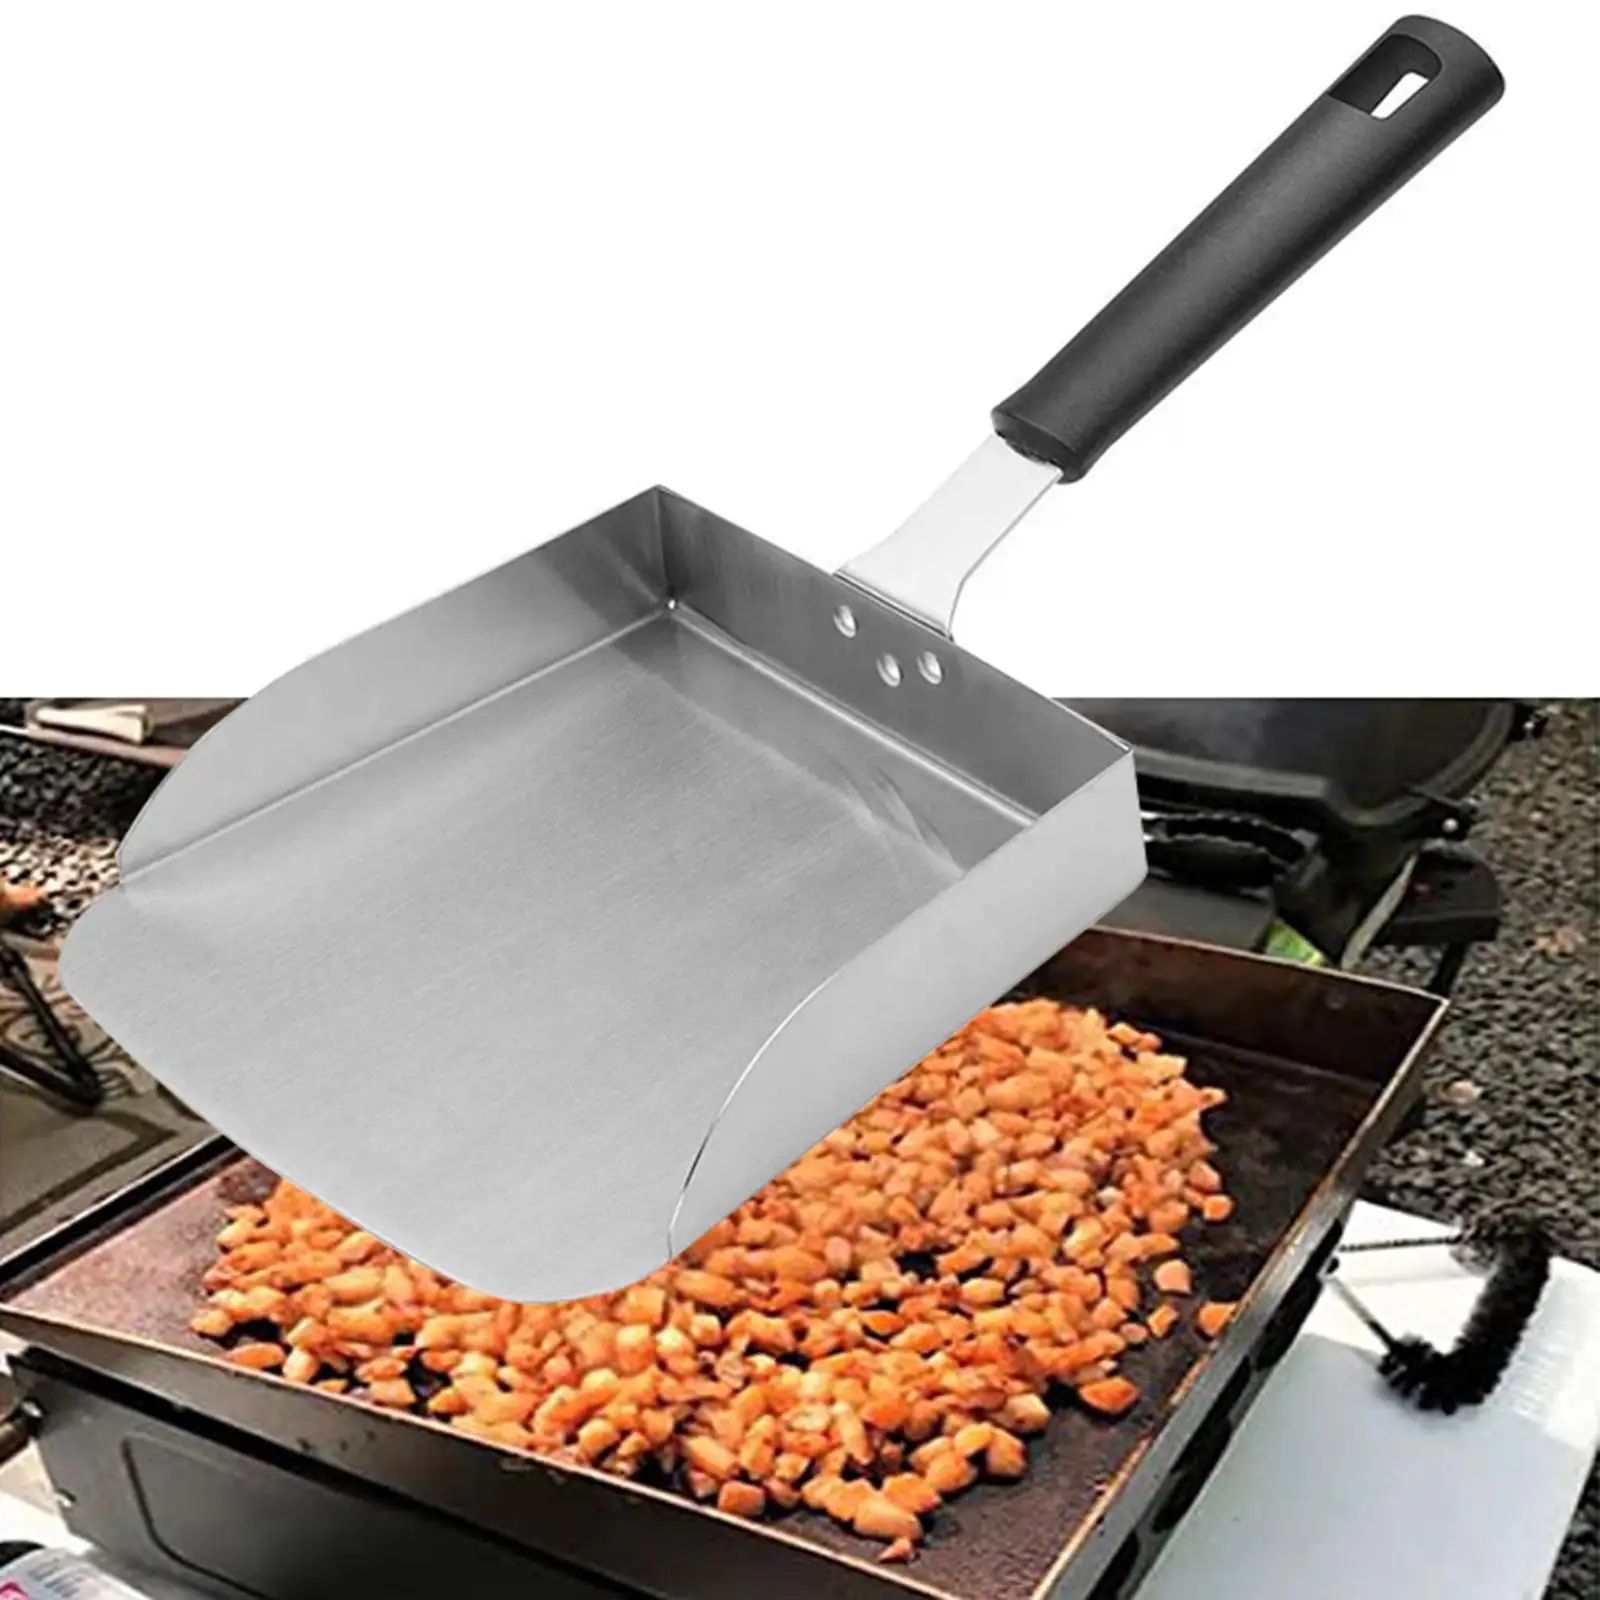 Creative French Fries Snack Mobile Shovel Stainless Steel Food Spatula, Long Handle Oven or Grill Use BBQ Tools BBQ Spatula,